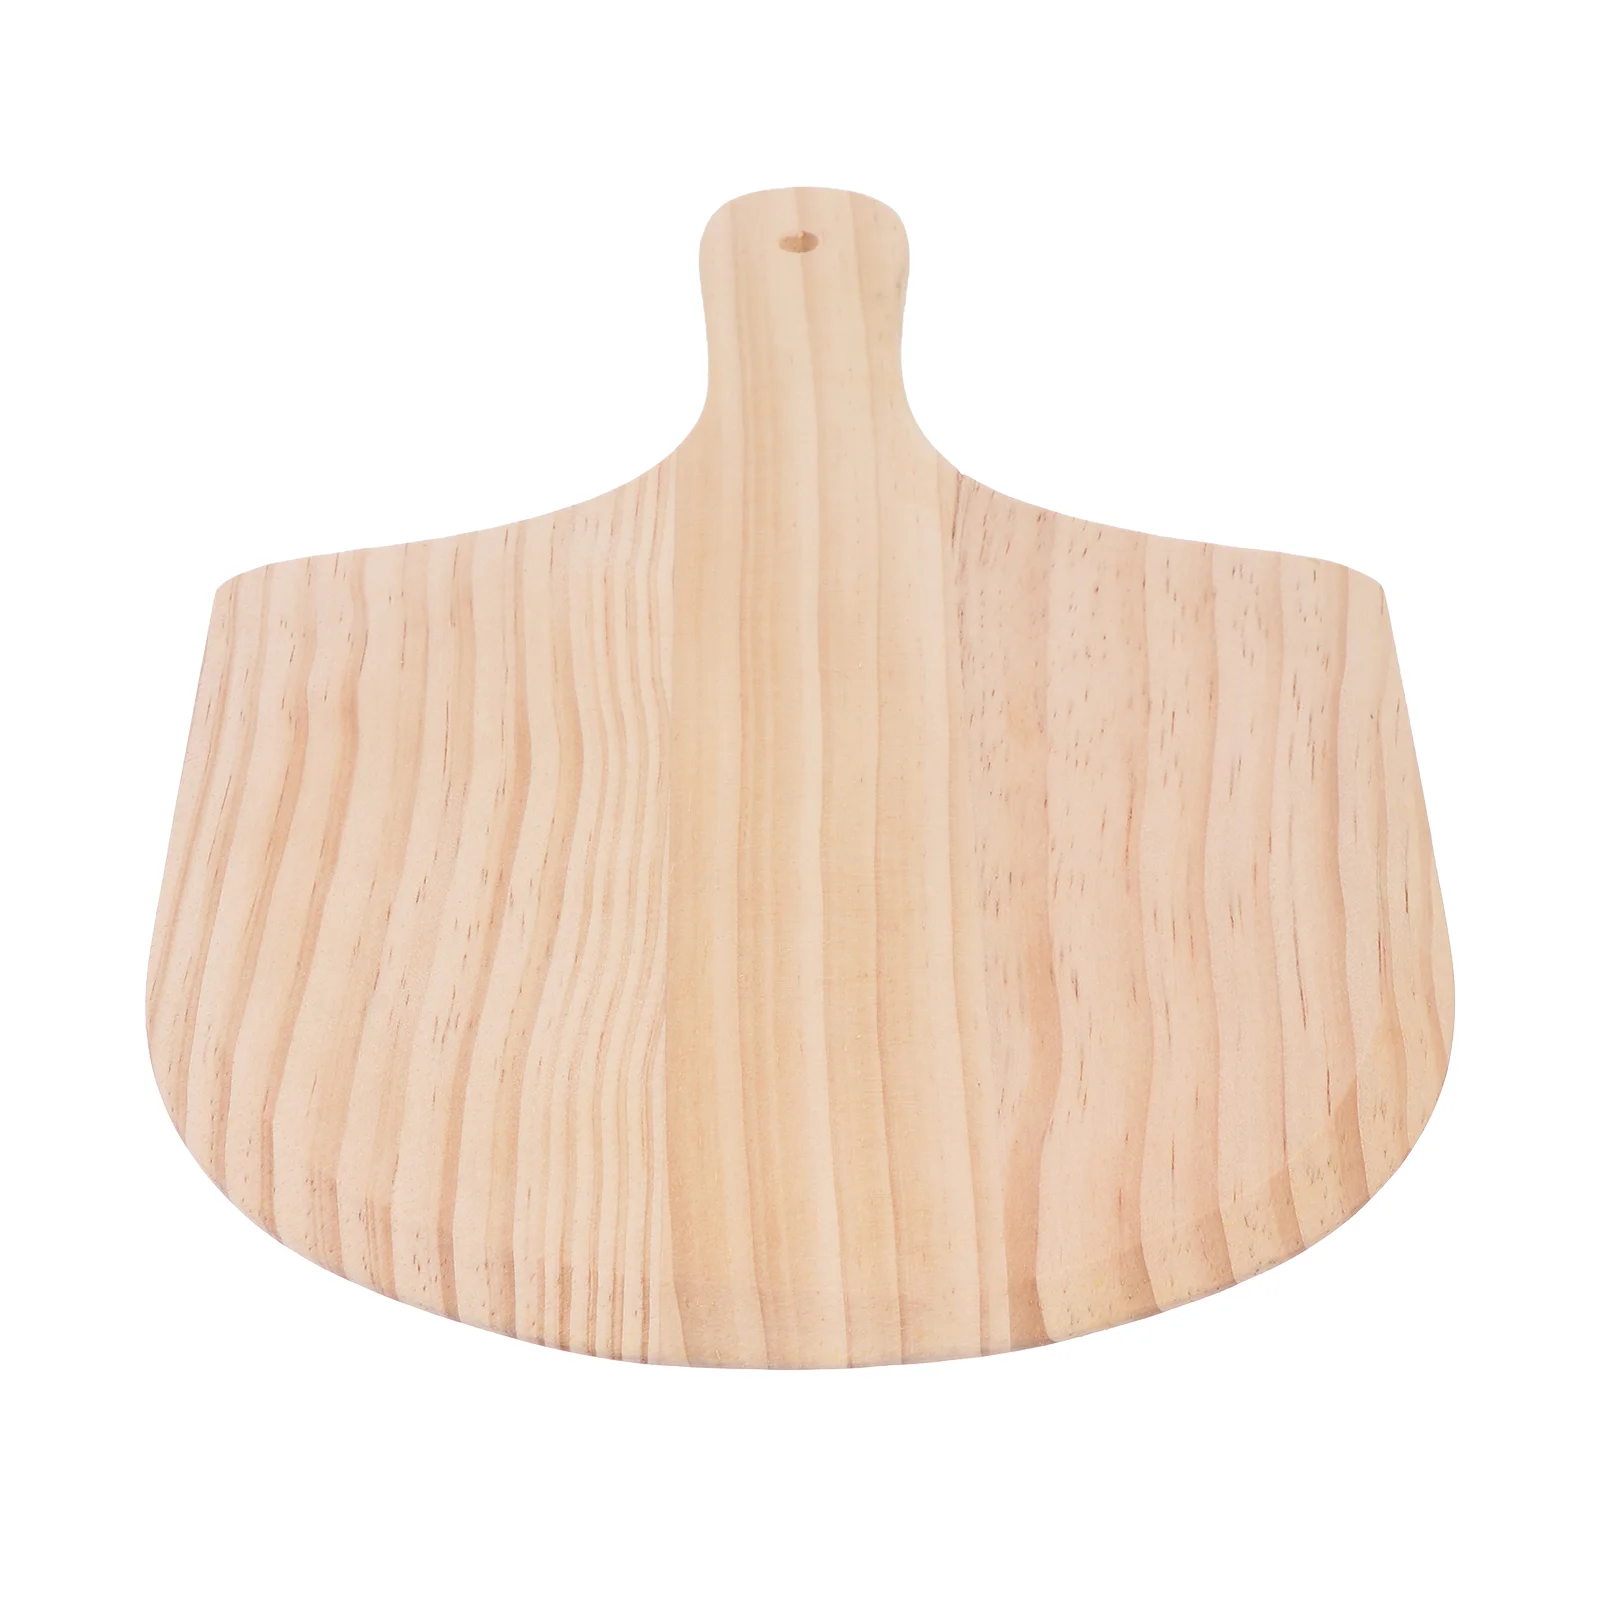 

Wooden Pizza Serving Plate Wooden Pizza Peel Portable Pizza Pan Kitchen Tool